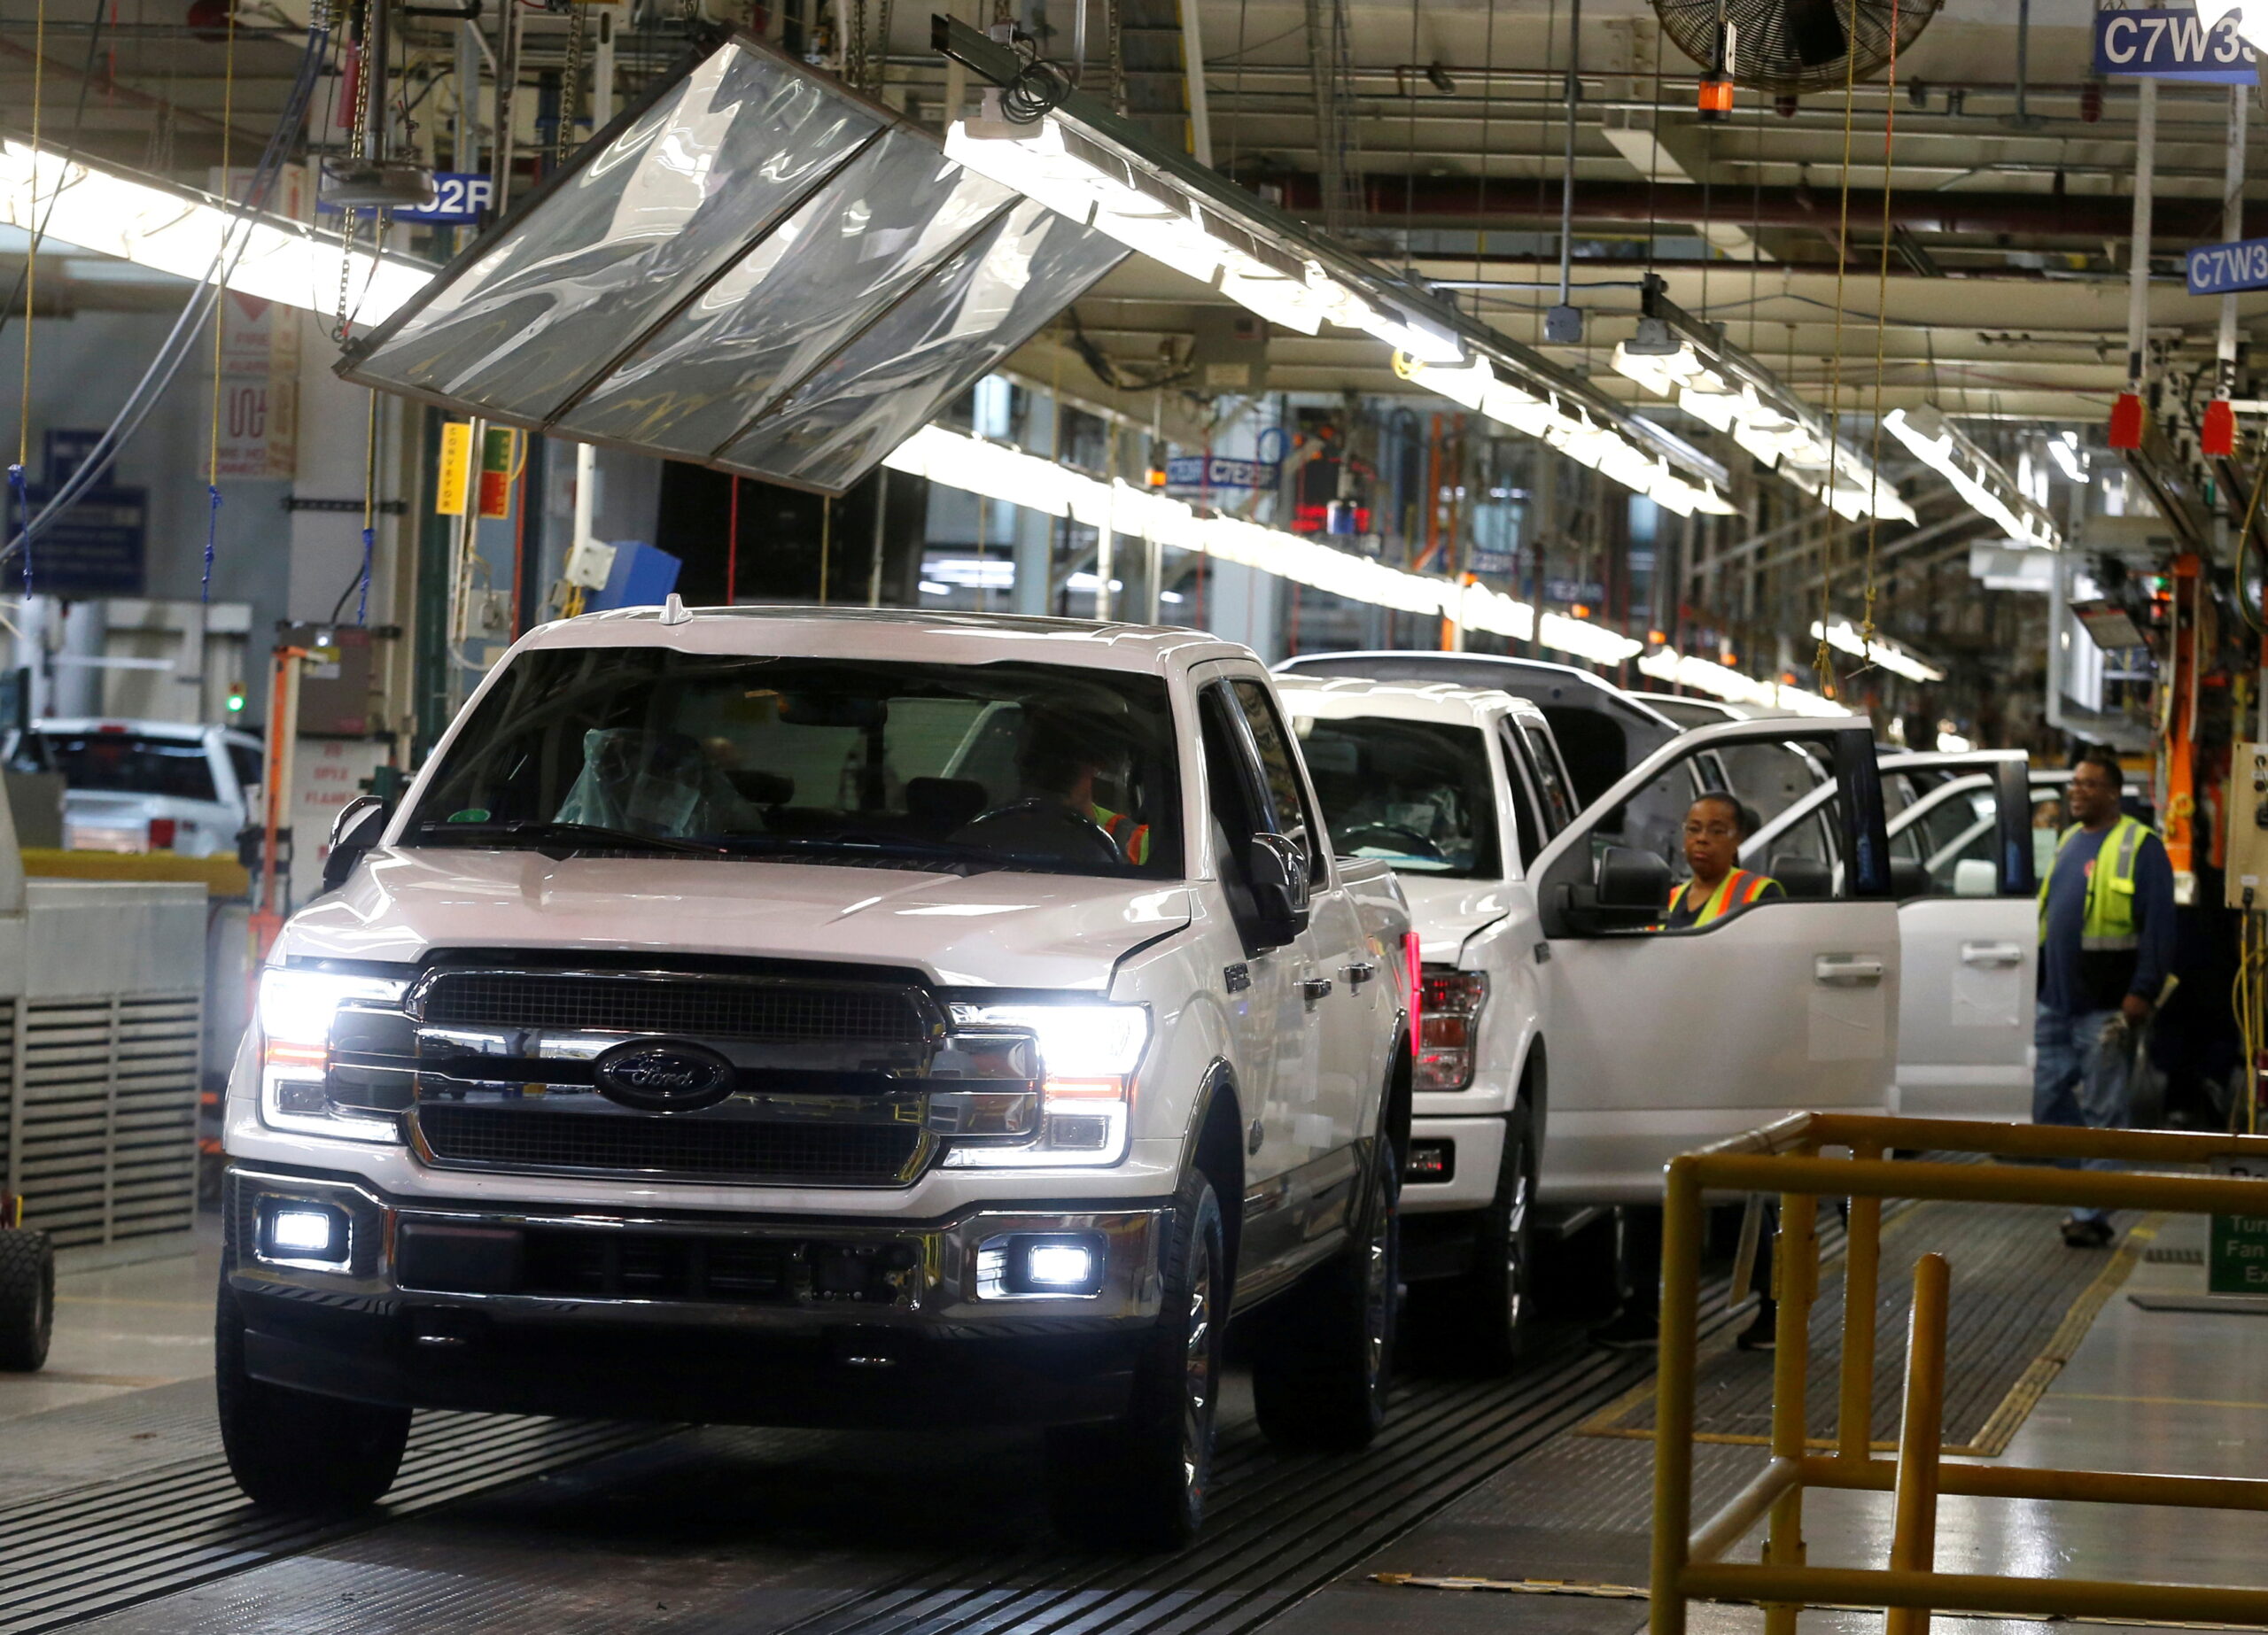 Ford cuts production again over chip deficiency, F-150 plants influenced